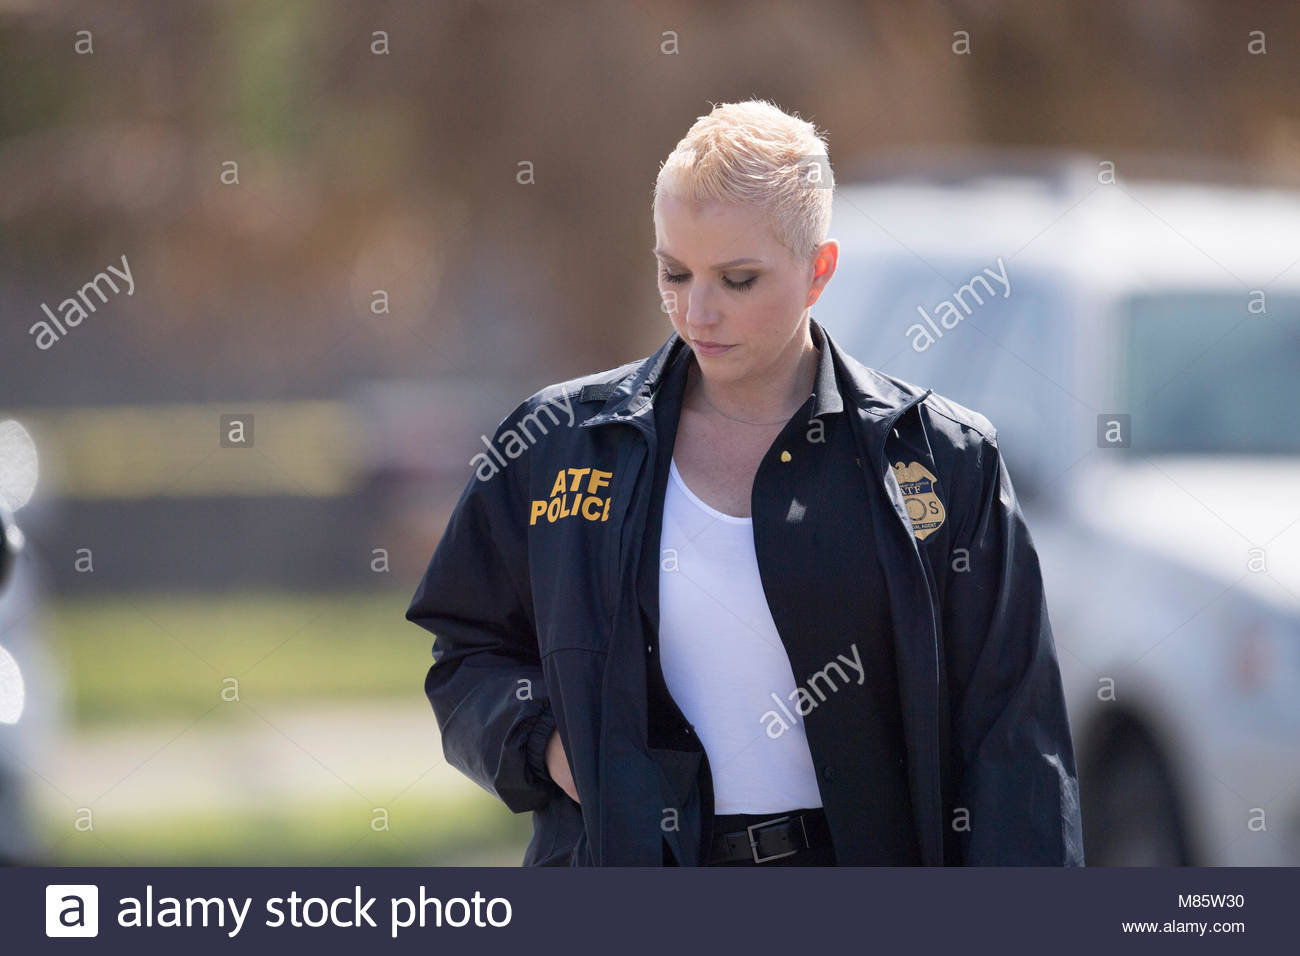 austin-texas-march-14-2018-a-female-atf-agent-on-the-scene-of-an-active-M85W30.jpg